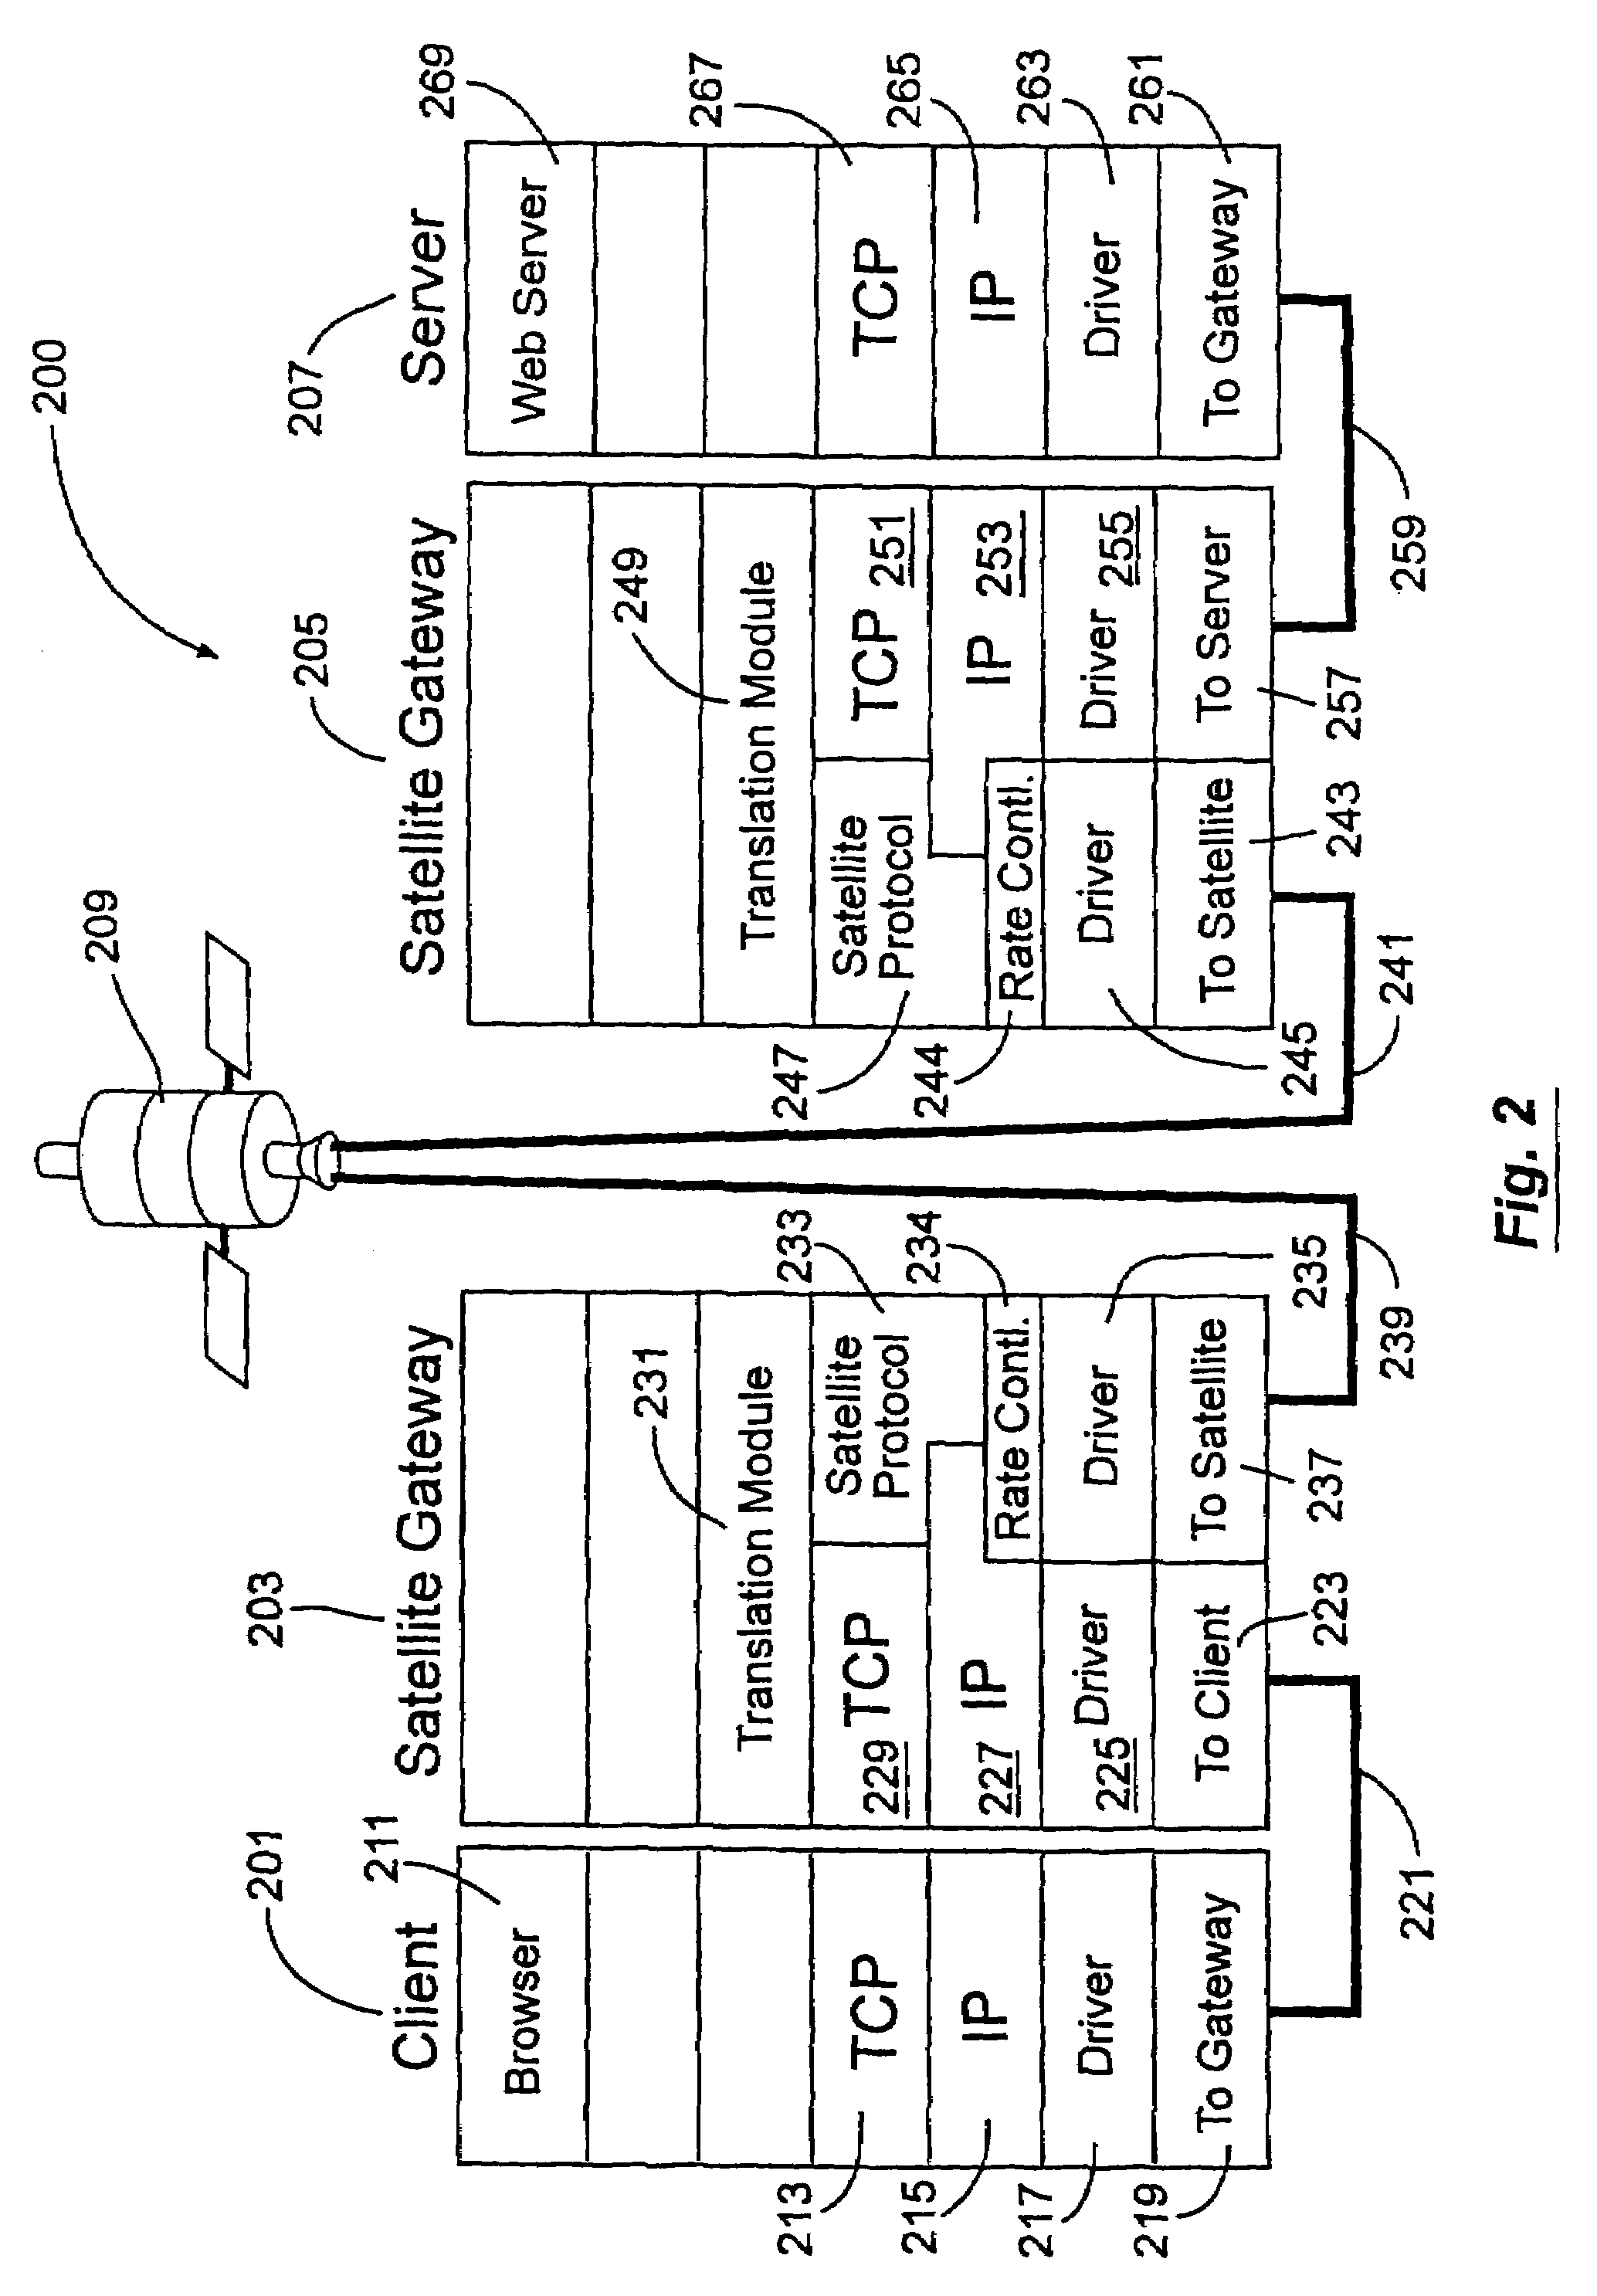 Pre-fetch communication systems and methods